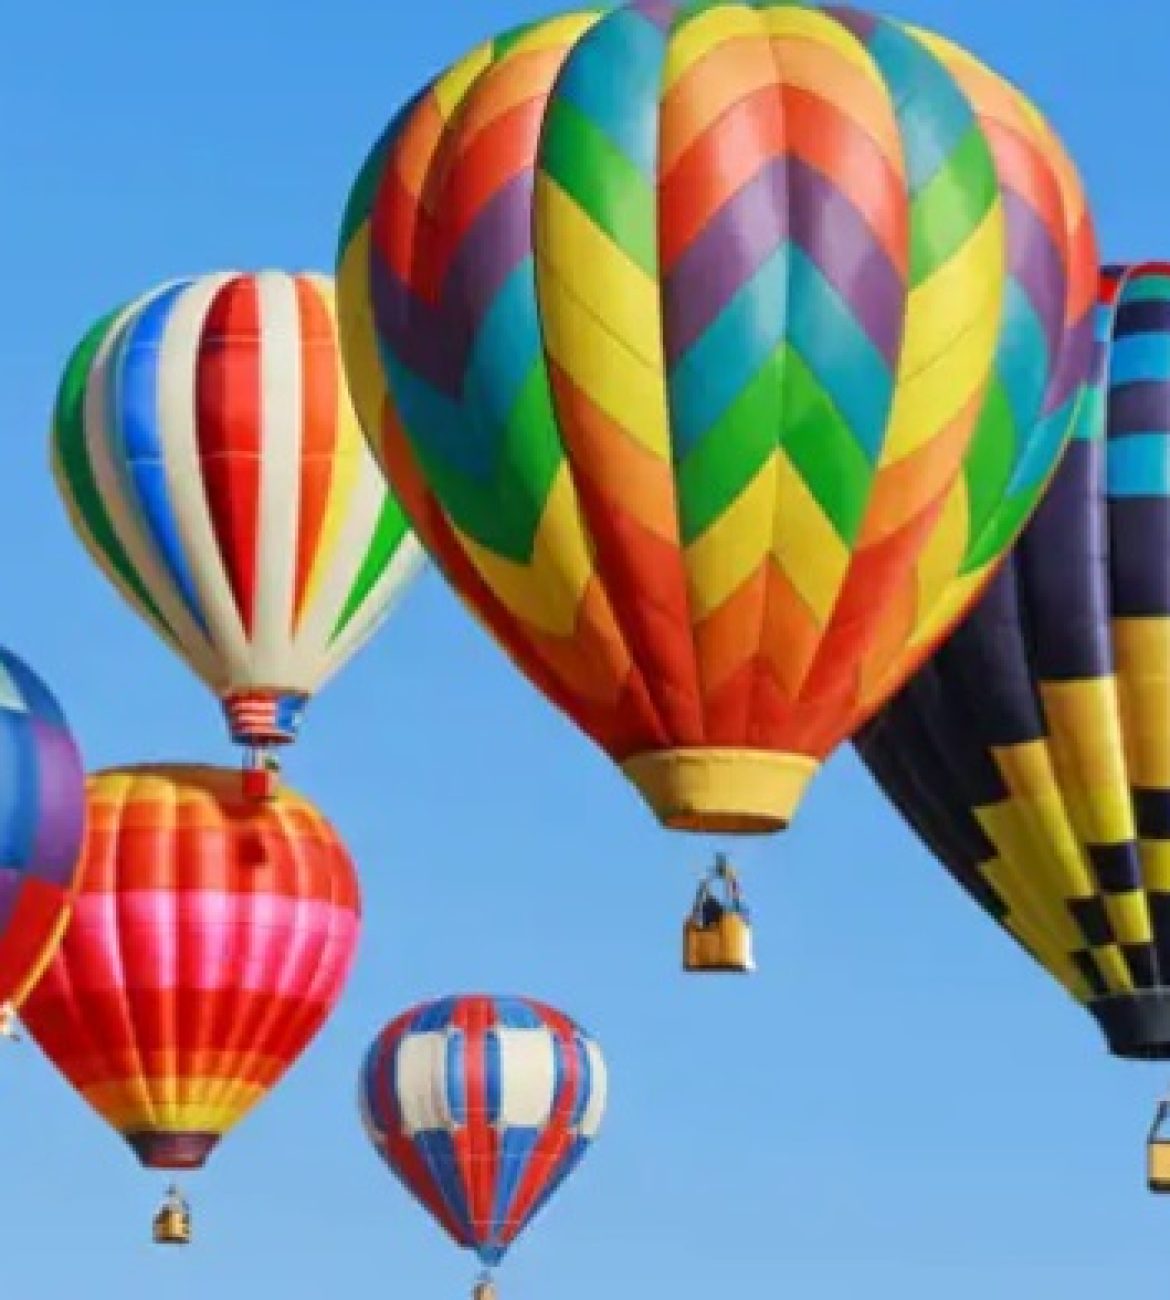 Hot Air Balloon Rides: All You Need to Know